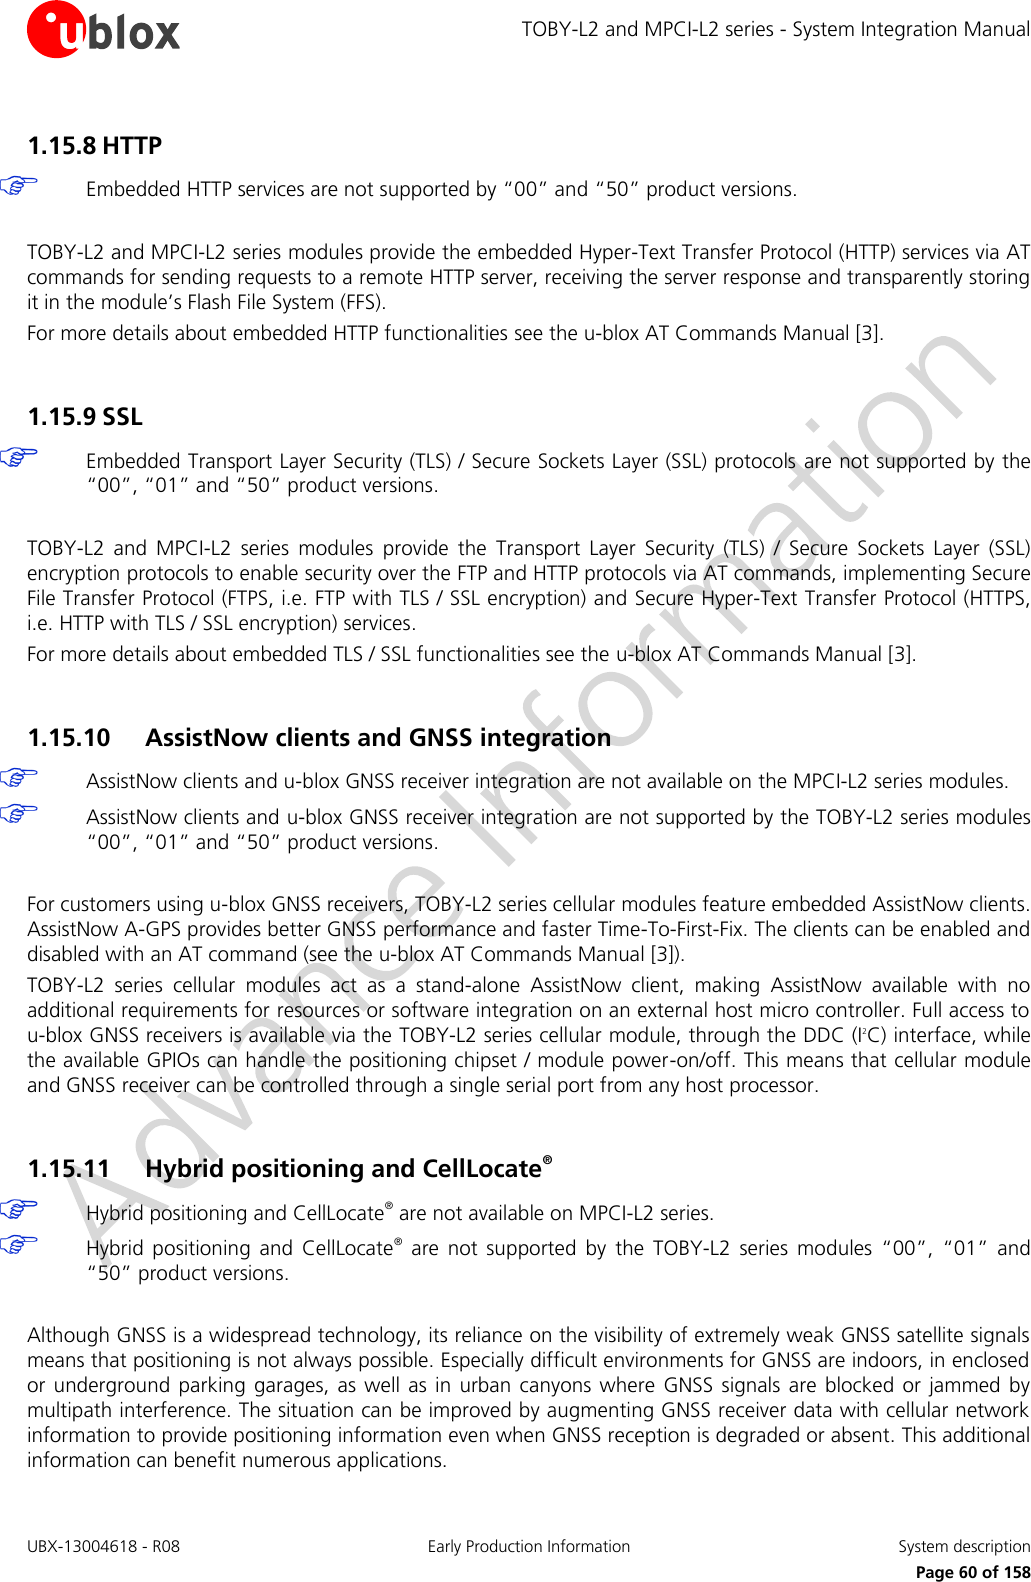 TOBY-L2 and MPCI-L2 series - System Integration Manual UBX-13004618 - R08  Early Production Information  System description     Page 60 of 158 1.15.8 HTTP   Embedded HTTP services are not supported by “00” and “50” product versions.  TOBY-L2 and MPCI-L2 series modules provide the embedded Hyper-Text Transfer Protocol (HTTP) services via AT commands for sending requests to a remote HTTP server, receiving the server response and transparently storing it in the module’s Flash File System (FFS).  For more details about embedded HTTP functionalities see the u-blox AT Commands Manual [3].  1.15.9 SSL  Embedded Transport Layer Security (TLS) / Secure Sockets Layer (SSL) protocols are not supported by the “00”, “01” and “50” product versions.  TOBY-L2  and  MPCI-L2  series  modules  provide  the  Transport  Layer  Security  (TLS)  /  Secure  Sockets  Layer  (SSL) encryption protocols to enable security over the FTP and HTTP protocols via AT commands, implementing Secure File Transfer Protocol (FTPS, i.e. FTP with TLS / SSL encryption) and Secure Hyper-Text Transfer Protocol (HTTPS, i.e. HTTP with TLS / SSL encryption) services.  For more details about embedded TLS / SSL functionalities see the u-blox AT Commands Manual [3].  1.15.10 AssistNow clients and GNSS integration  AssistNow clients and u-blox GNSS receiver integration are not available on the MPCI-L2 series modules.  AssistNow clients and u-blox GNSS receiver integration are not supported by the TOBY-L2 series modules “00”, “01” and “50” product versions.  For customers using u-blox GNSS receivers, TOBY-L2 series cellular modules feature embedded AssistNow clients. AssistNow A-GPS provides better GNSS performance and faster Time-To-First-Fix. The clients can be enabled and disabled with an AT command (see the u-blox AT Commands Manual [3]). TOBY-L2  series  cellular  modules  act  as  a  stand-alone  AssistNow  client,  making  AssistNow  available  with  no additional requirements for resources or software integration on an external host micro controller. Full access to u-blox GNSS receivers is available via the TOBY-L2 series cellular module, through the DDC (I2C) interface, while the available GPIOs can handle the positioning chipset / module power-on/off. This means that cellular module and GNSS receiver can be controlled through a single serial port from any host processor.  1.15.11 Hybrid positioning and CellLocate®  Hybrid positioning and CellLocate® are not available on MPCI-L2 series.  Hybrid  positioning  and  CellLocate®  are  not  supported  by  the  TOBY-L2  series  modules  “00”,  “01” and “50” product versions.  Although GNSS is a widespread technology, its reliance on the visibility of extremely weak GNSS satellite signals means that positioning is not always possible. Especially difficult environments for GNSS are indoors, in enclosed or underground  parking garages, as well  as  in  urban  canyons  where  GNSS signals  are  blocked  or  jammed  by multipath interference. The situation can be improved by augmenting GNSS receiver data with cellular network information to provide positioning information even when GNSS reception is degraded or absent. This additional information can benefit numerous applications. 